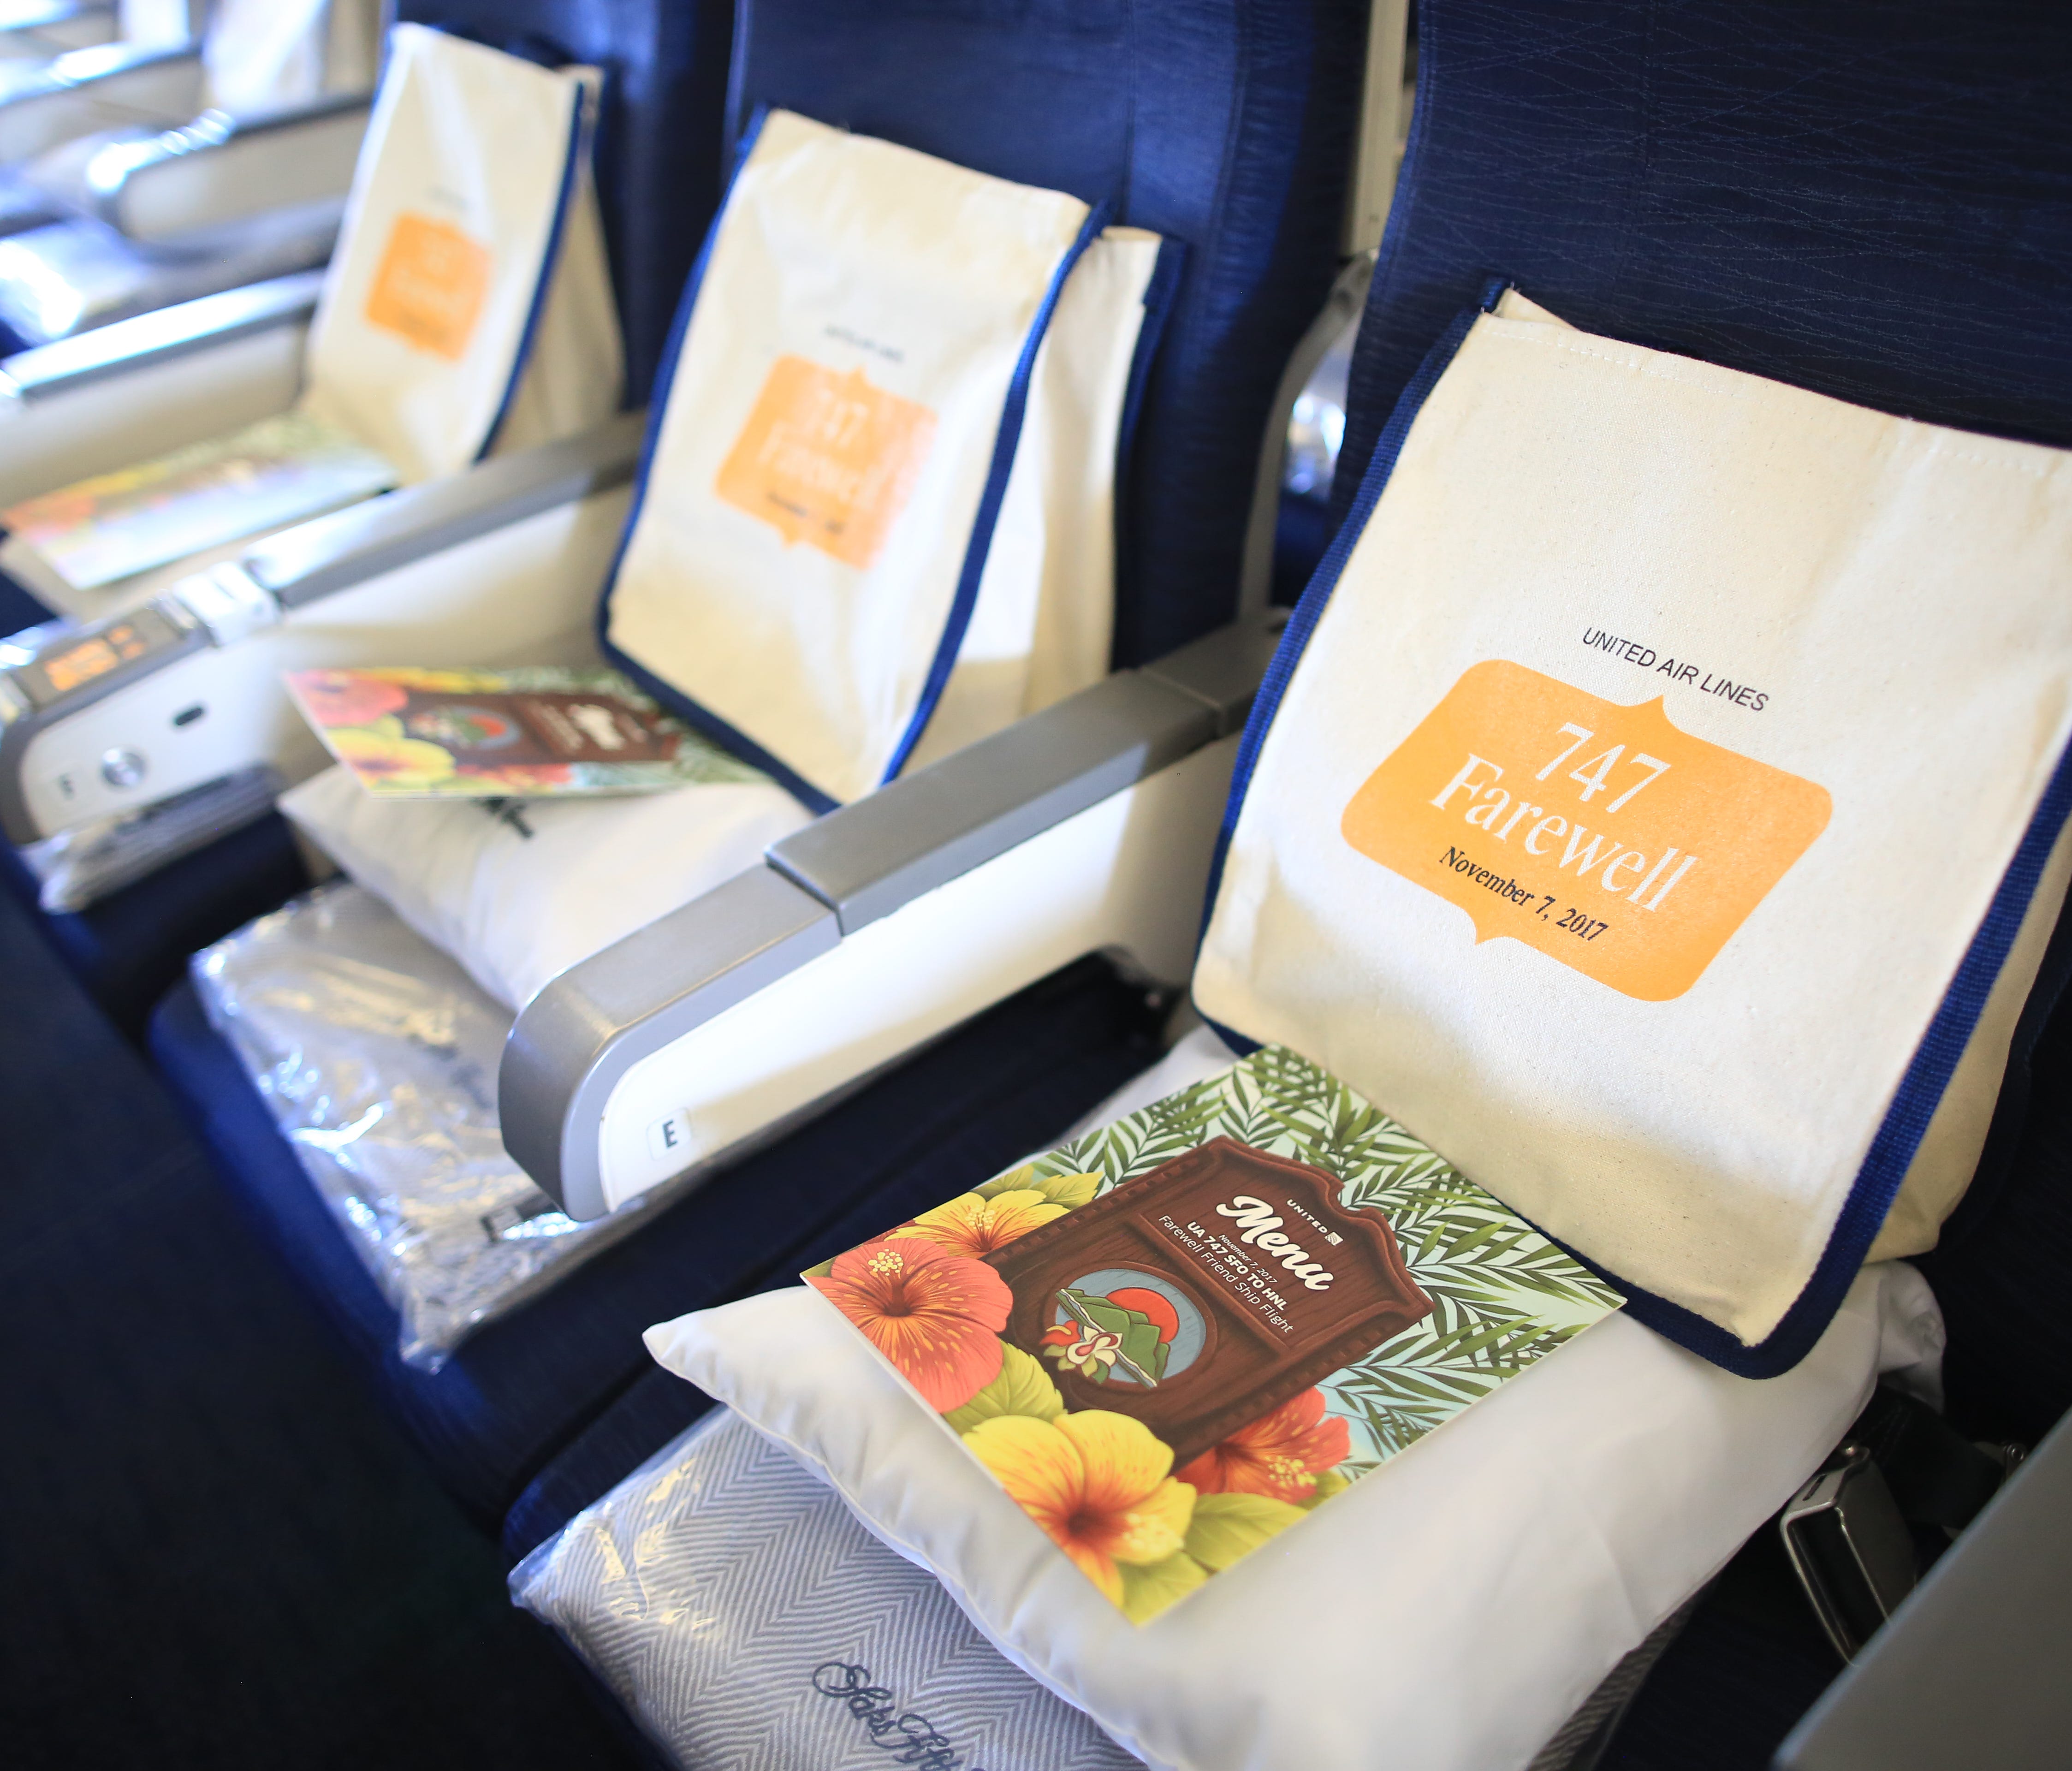 Special menus and gift bags await passengers aboard the last United Airlines Boeing 747 passenger flight on Nov. 7, 2017. The airline is retiring the jets after 47 years.